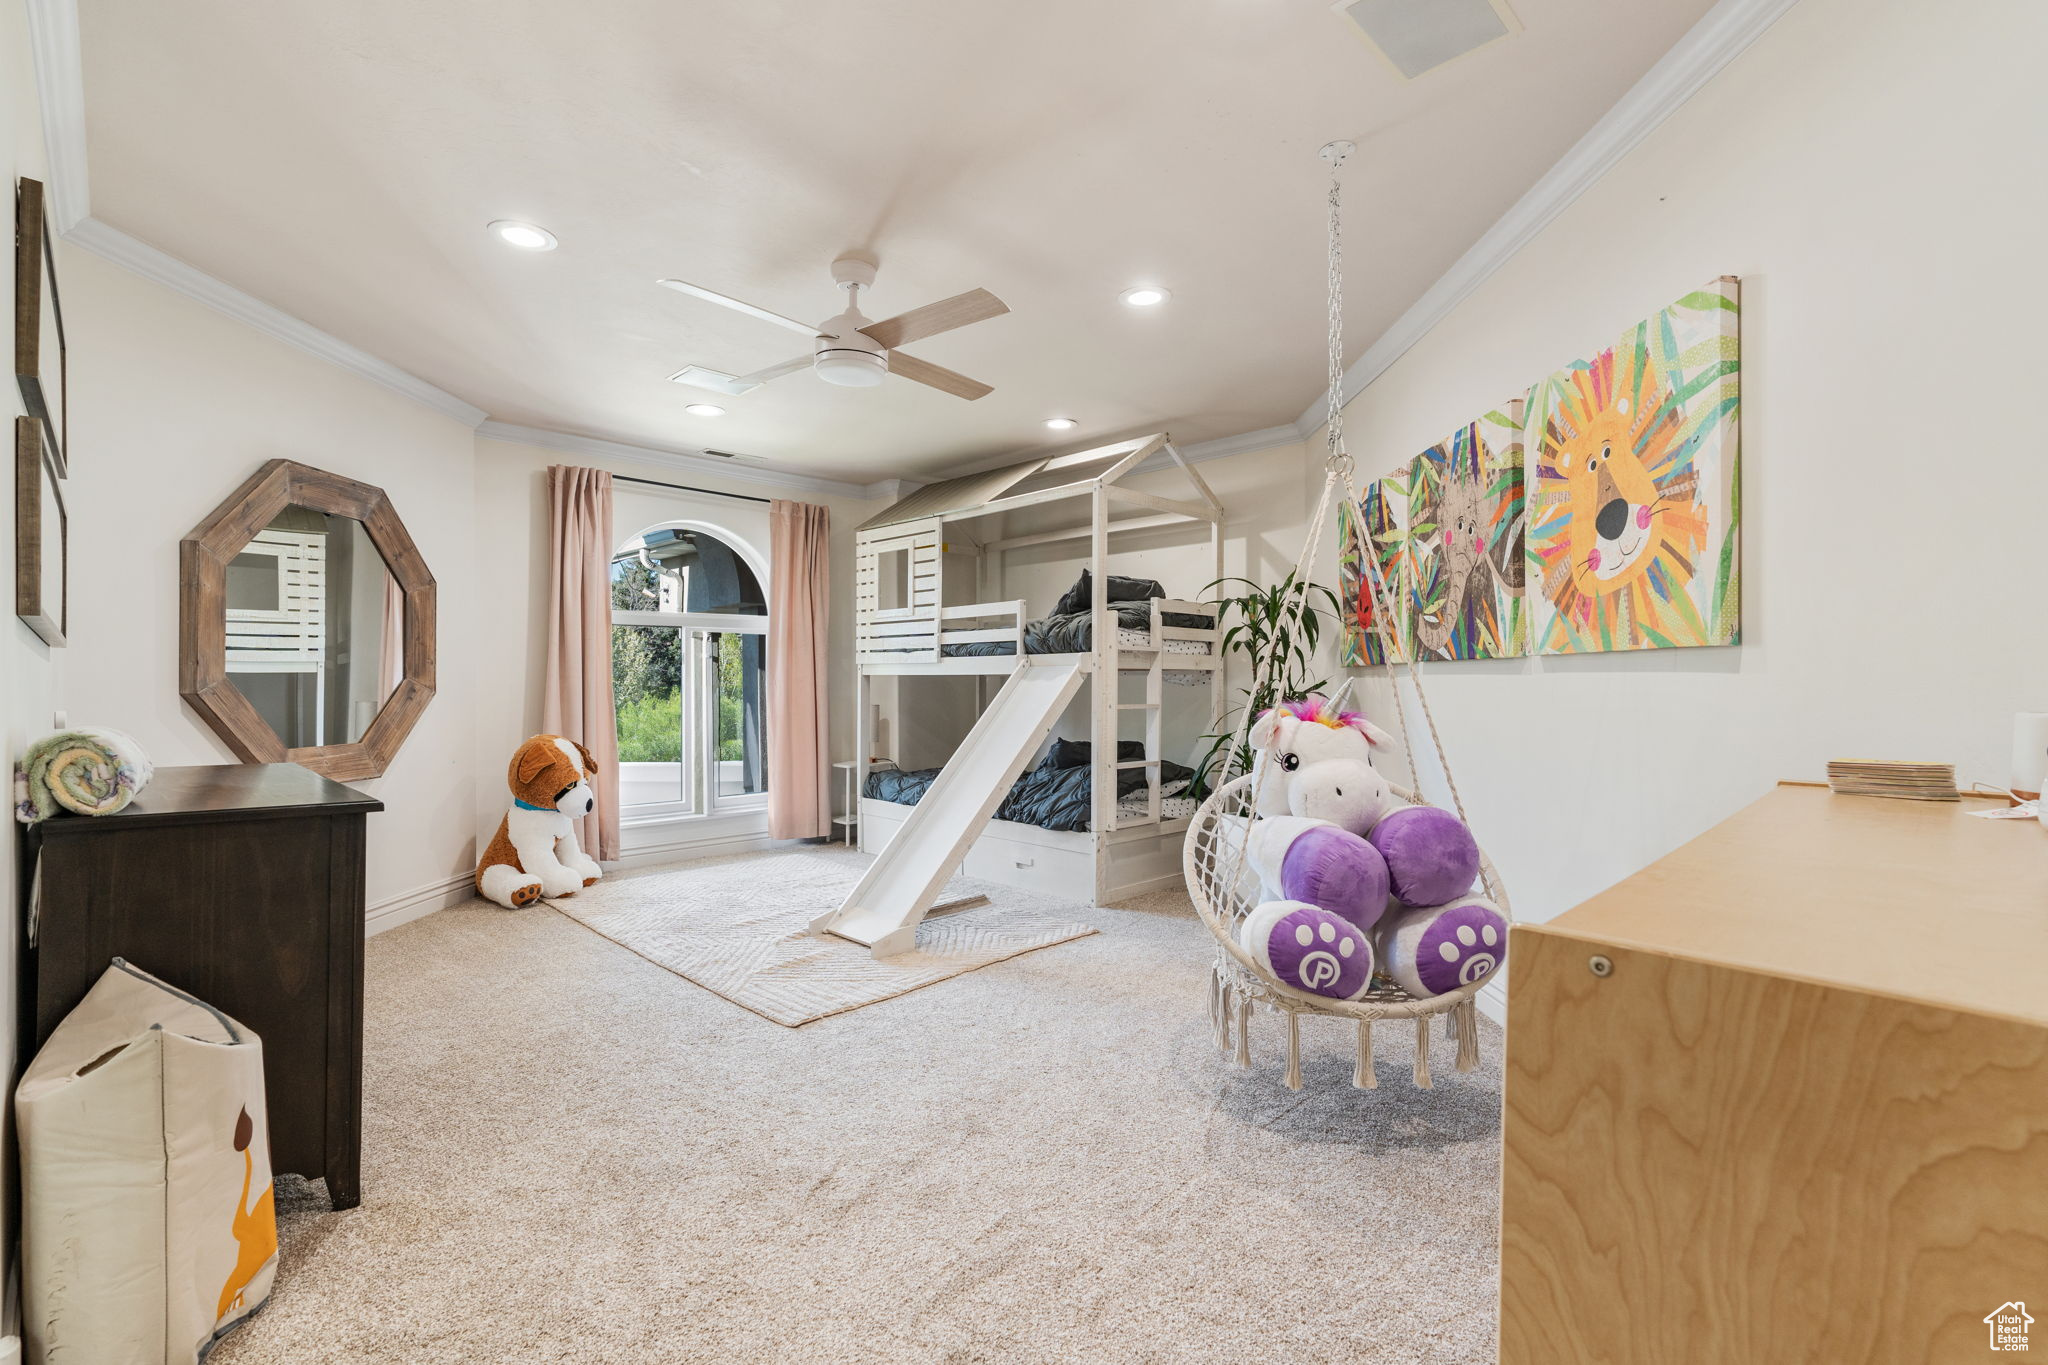 Exercise room with ceiling fan, carpet, and ornamental molding